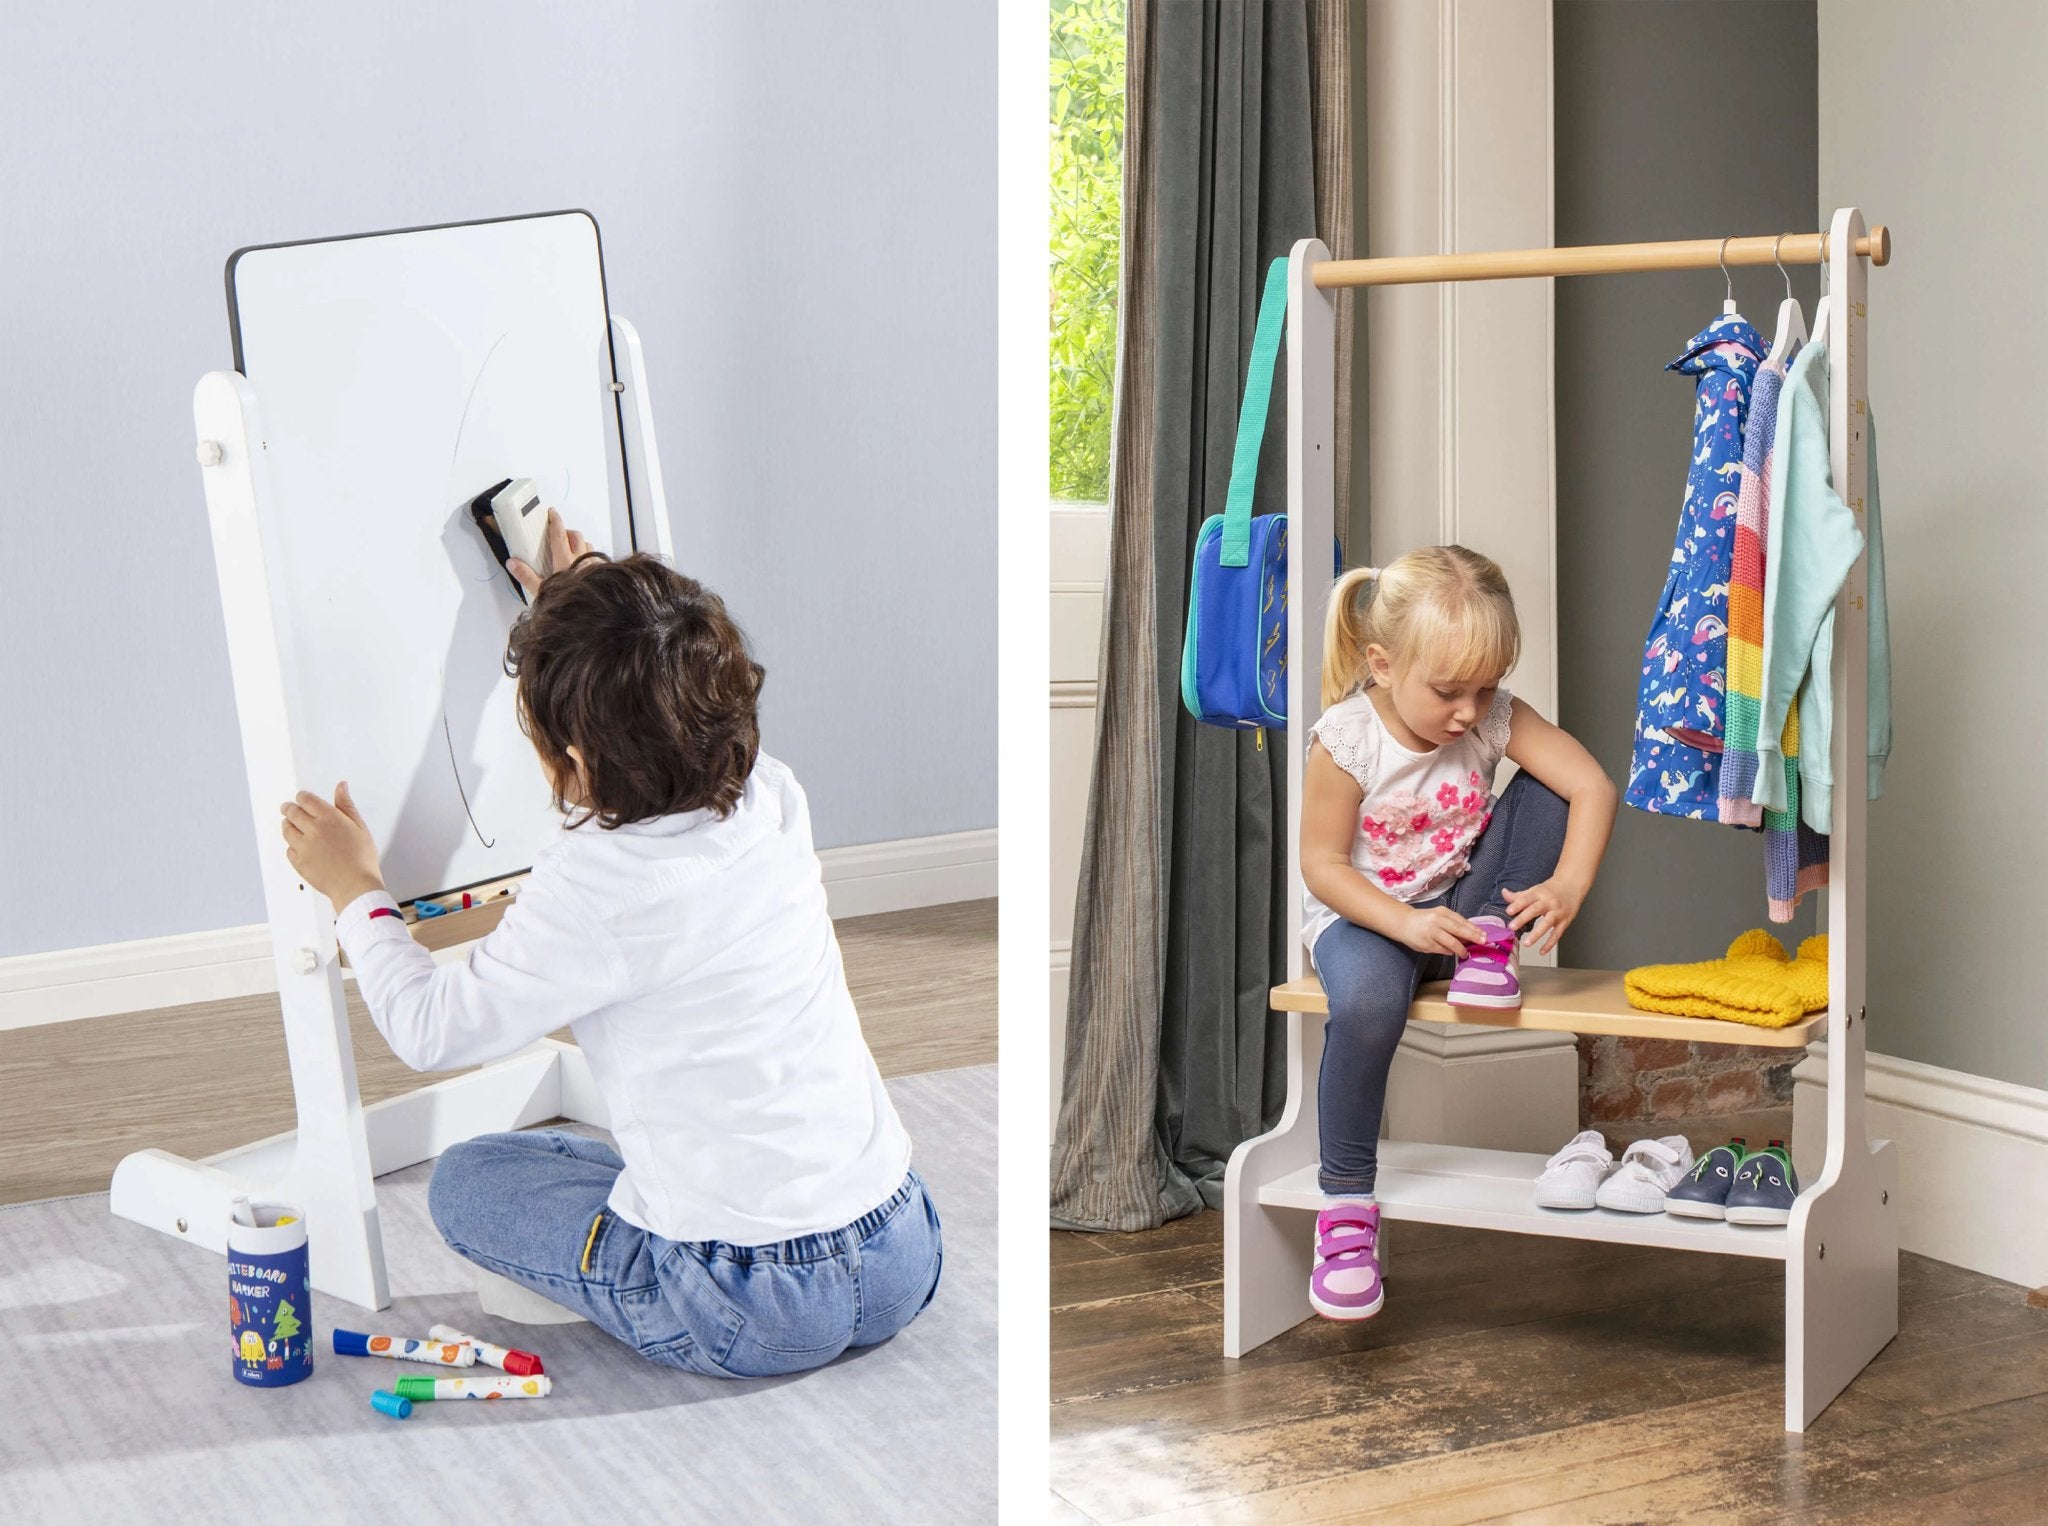 children playing with drawing board and clothing rack